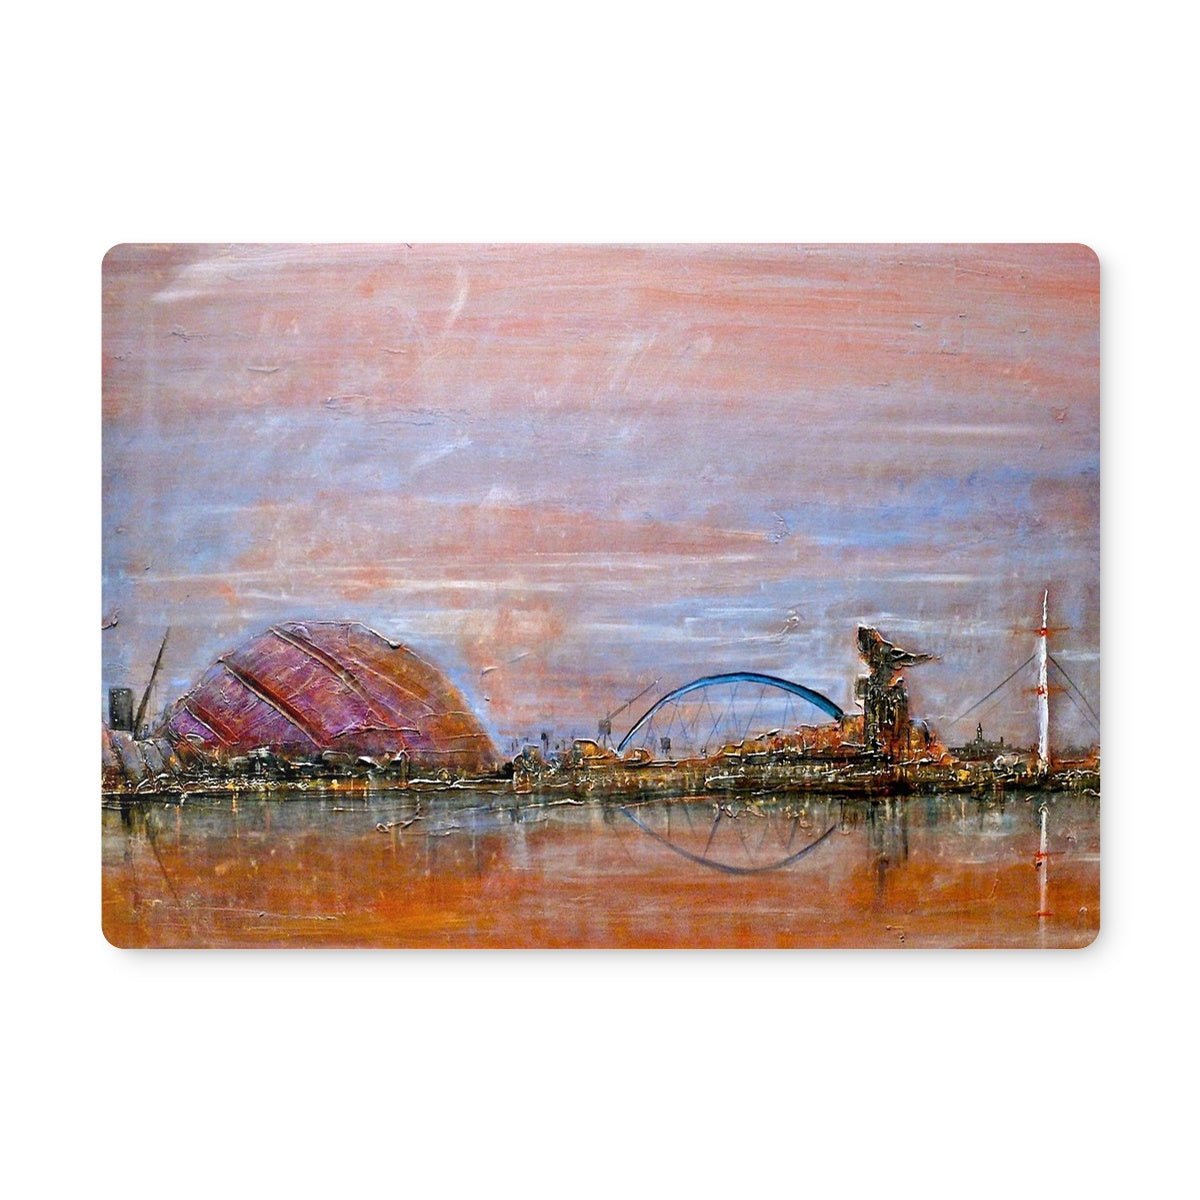 Glasgow Harbour Art Gifts Placemat-Placemats-Edinburgh & Glasgow Art Gallery-4 Placemats-Paintings, Prints, Homeware, Art Gifts From Scotland By Scottish Artist Kevin Hunter